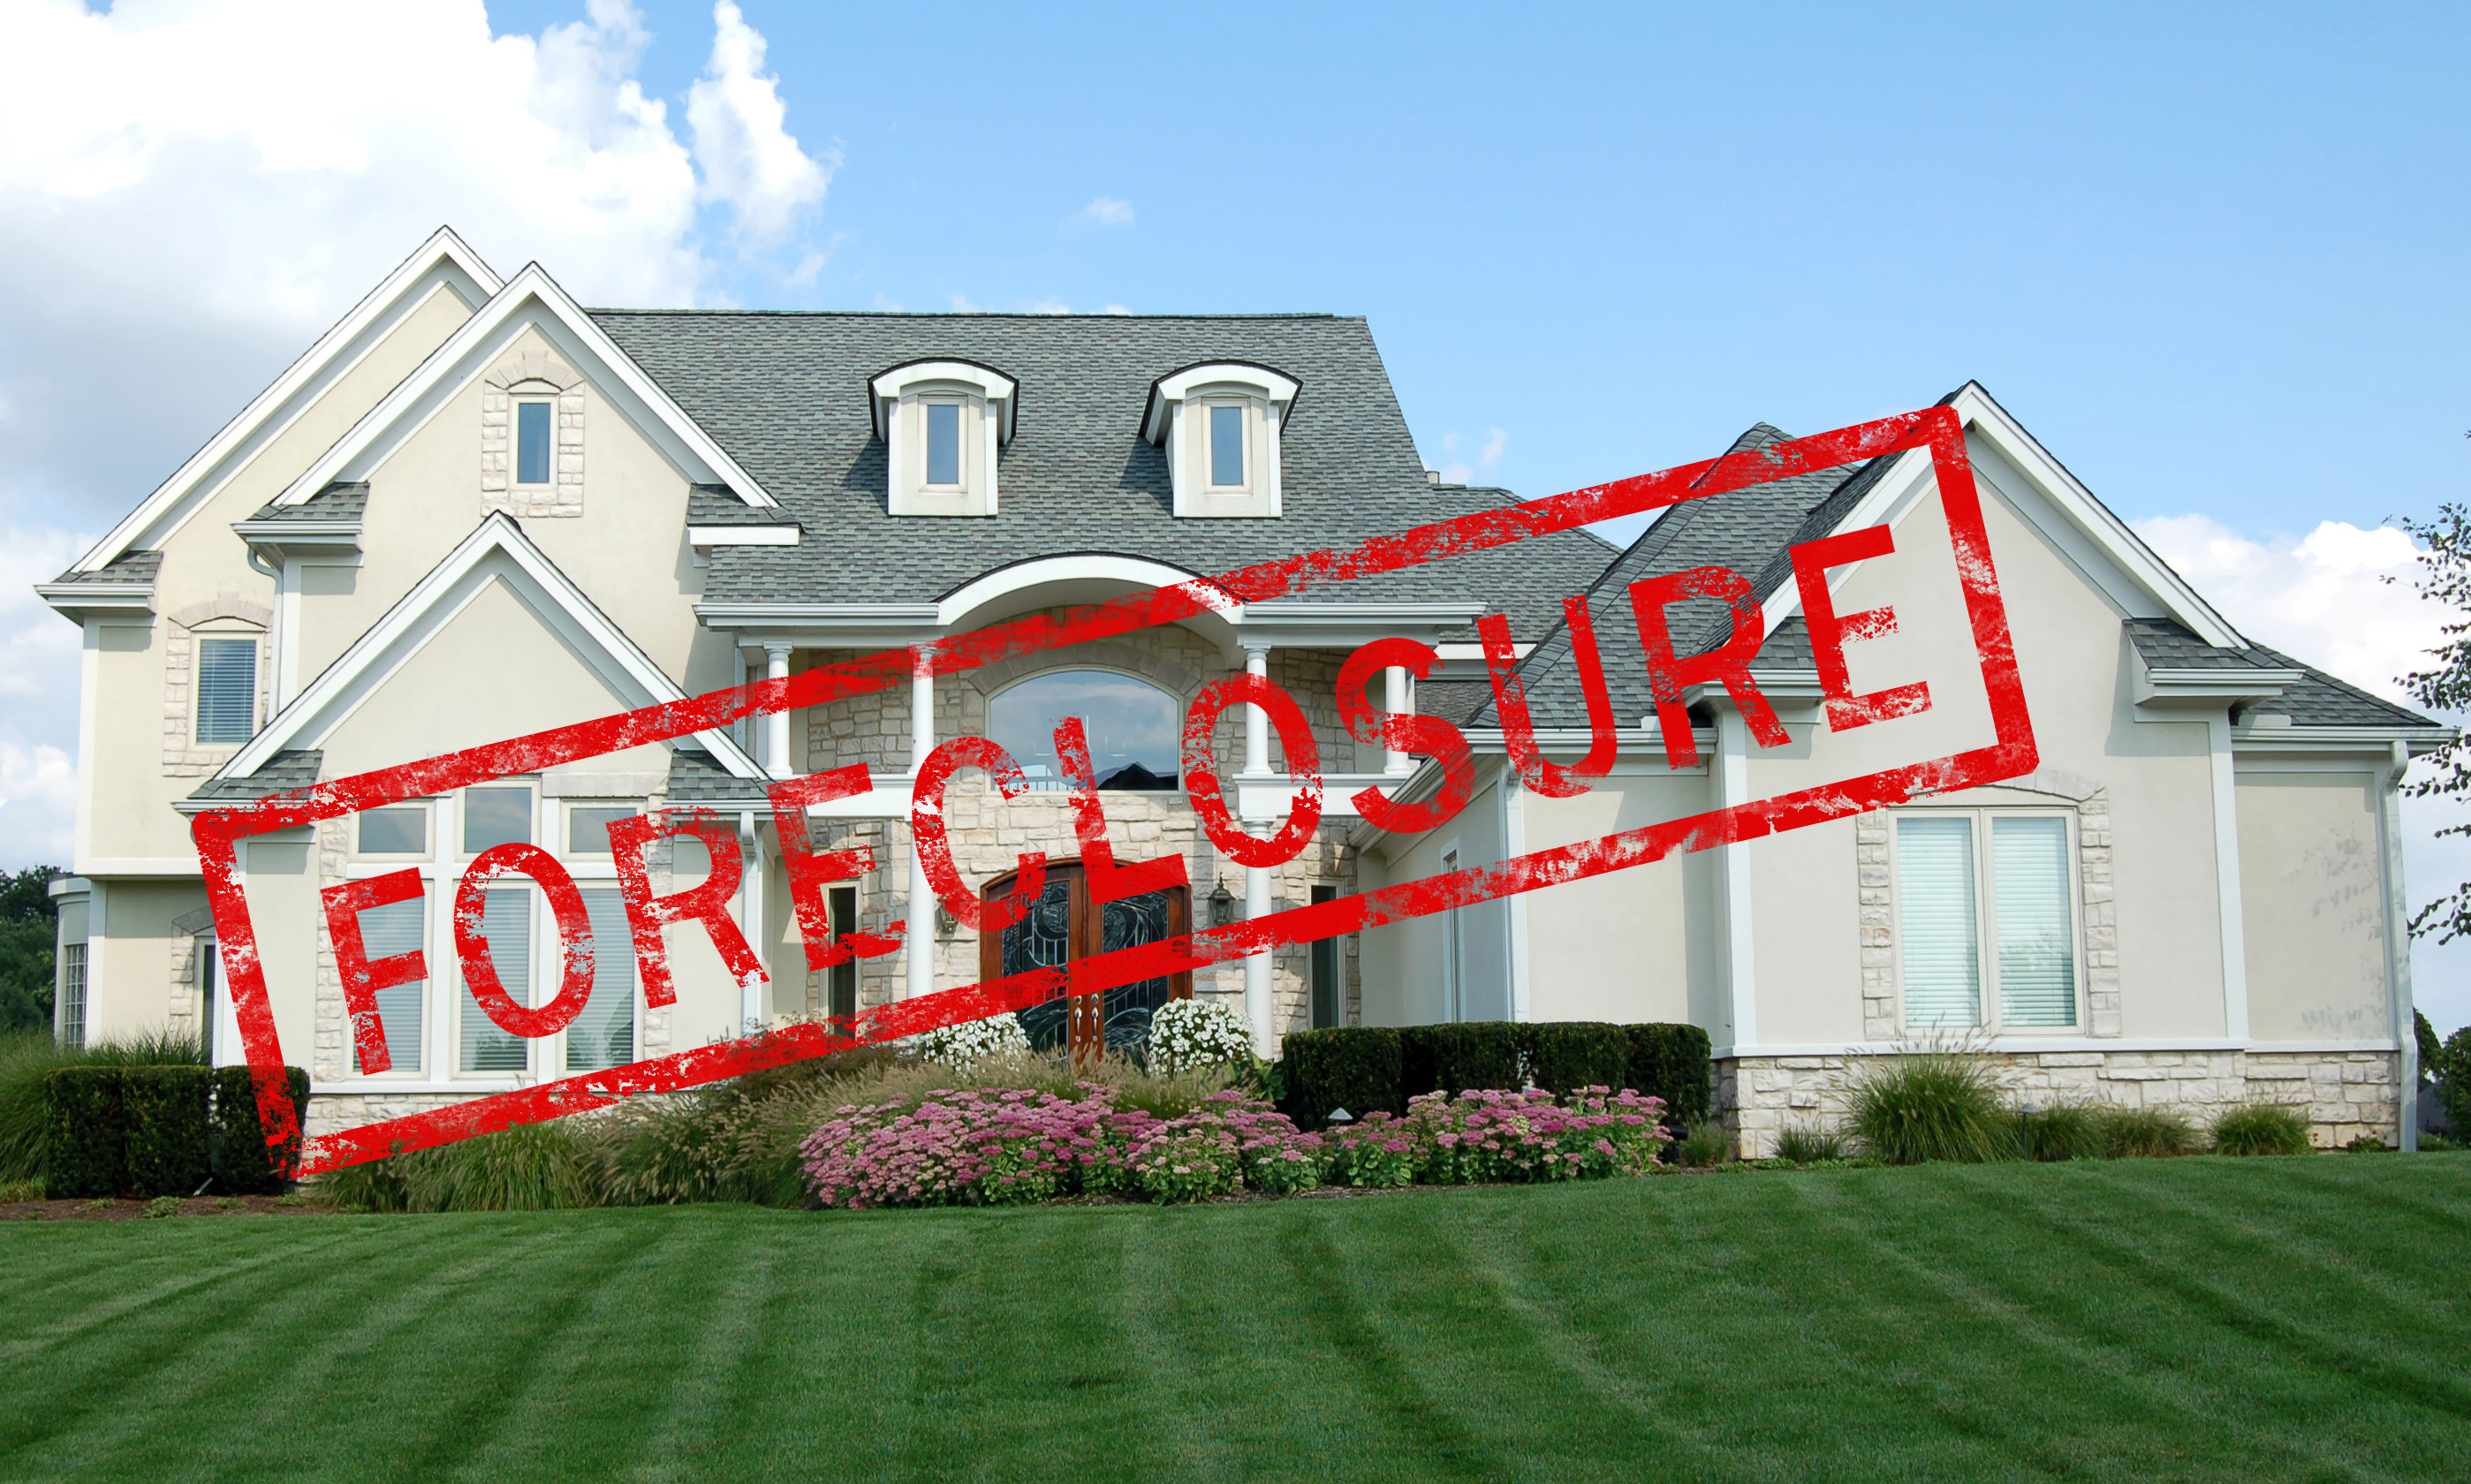 Call West Michigan Appraisal to order appraisals pertaining to Manistee foreclosures